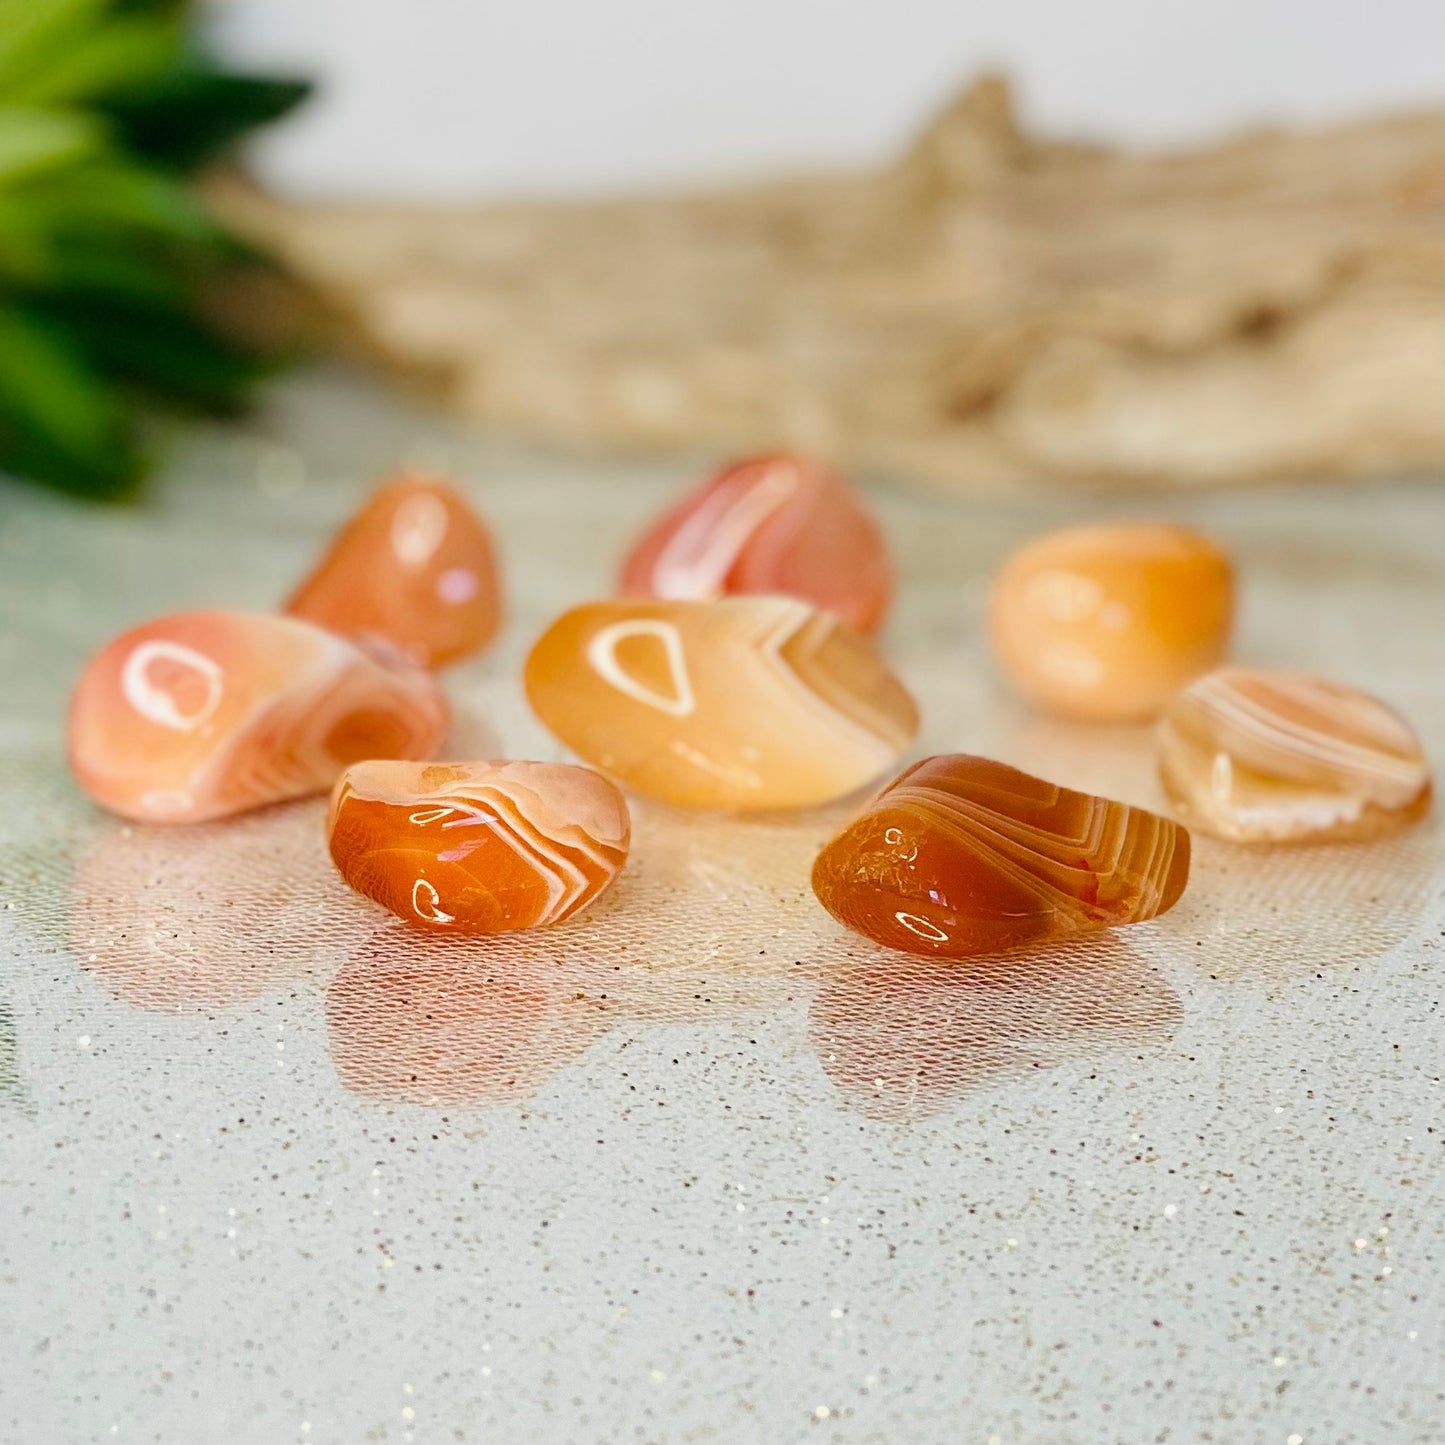 Banded Carnelian Agate Tumbled Crystal: Vibrant Patterns of Earth's Artistry